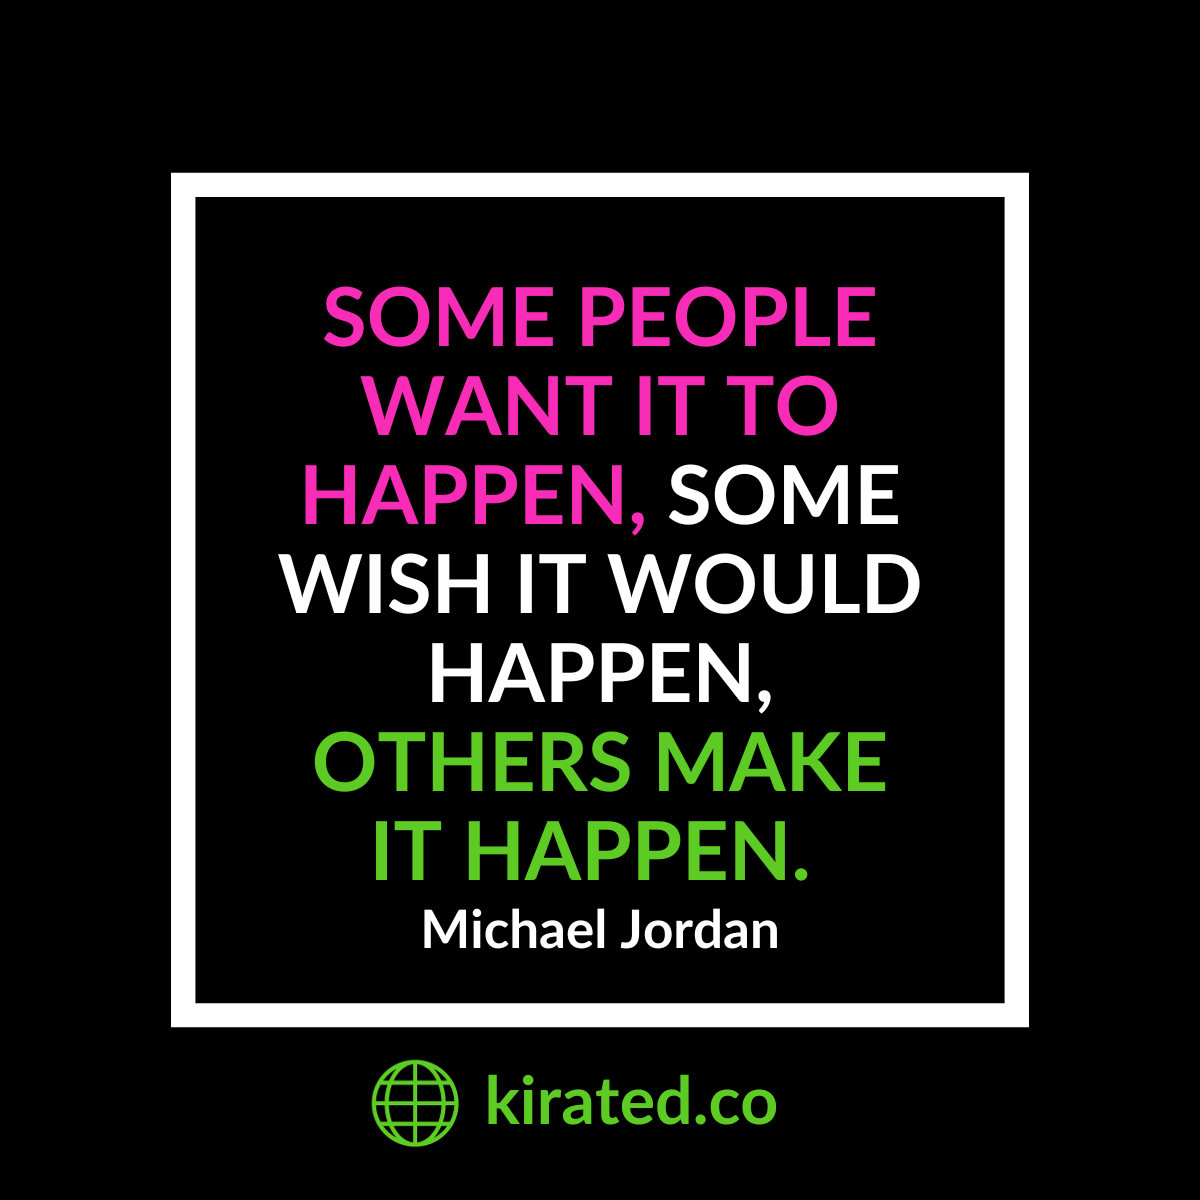 graphic with Michael Jordan quote, "Some people want it to happen, some wish it would happen, others make it happen. "